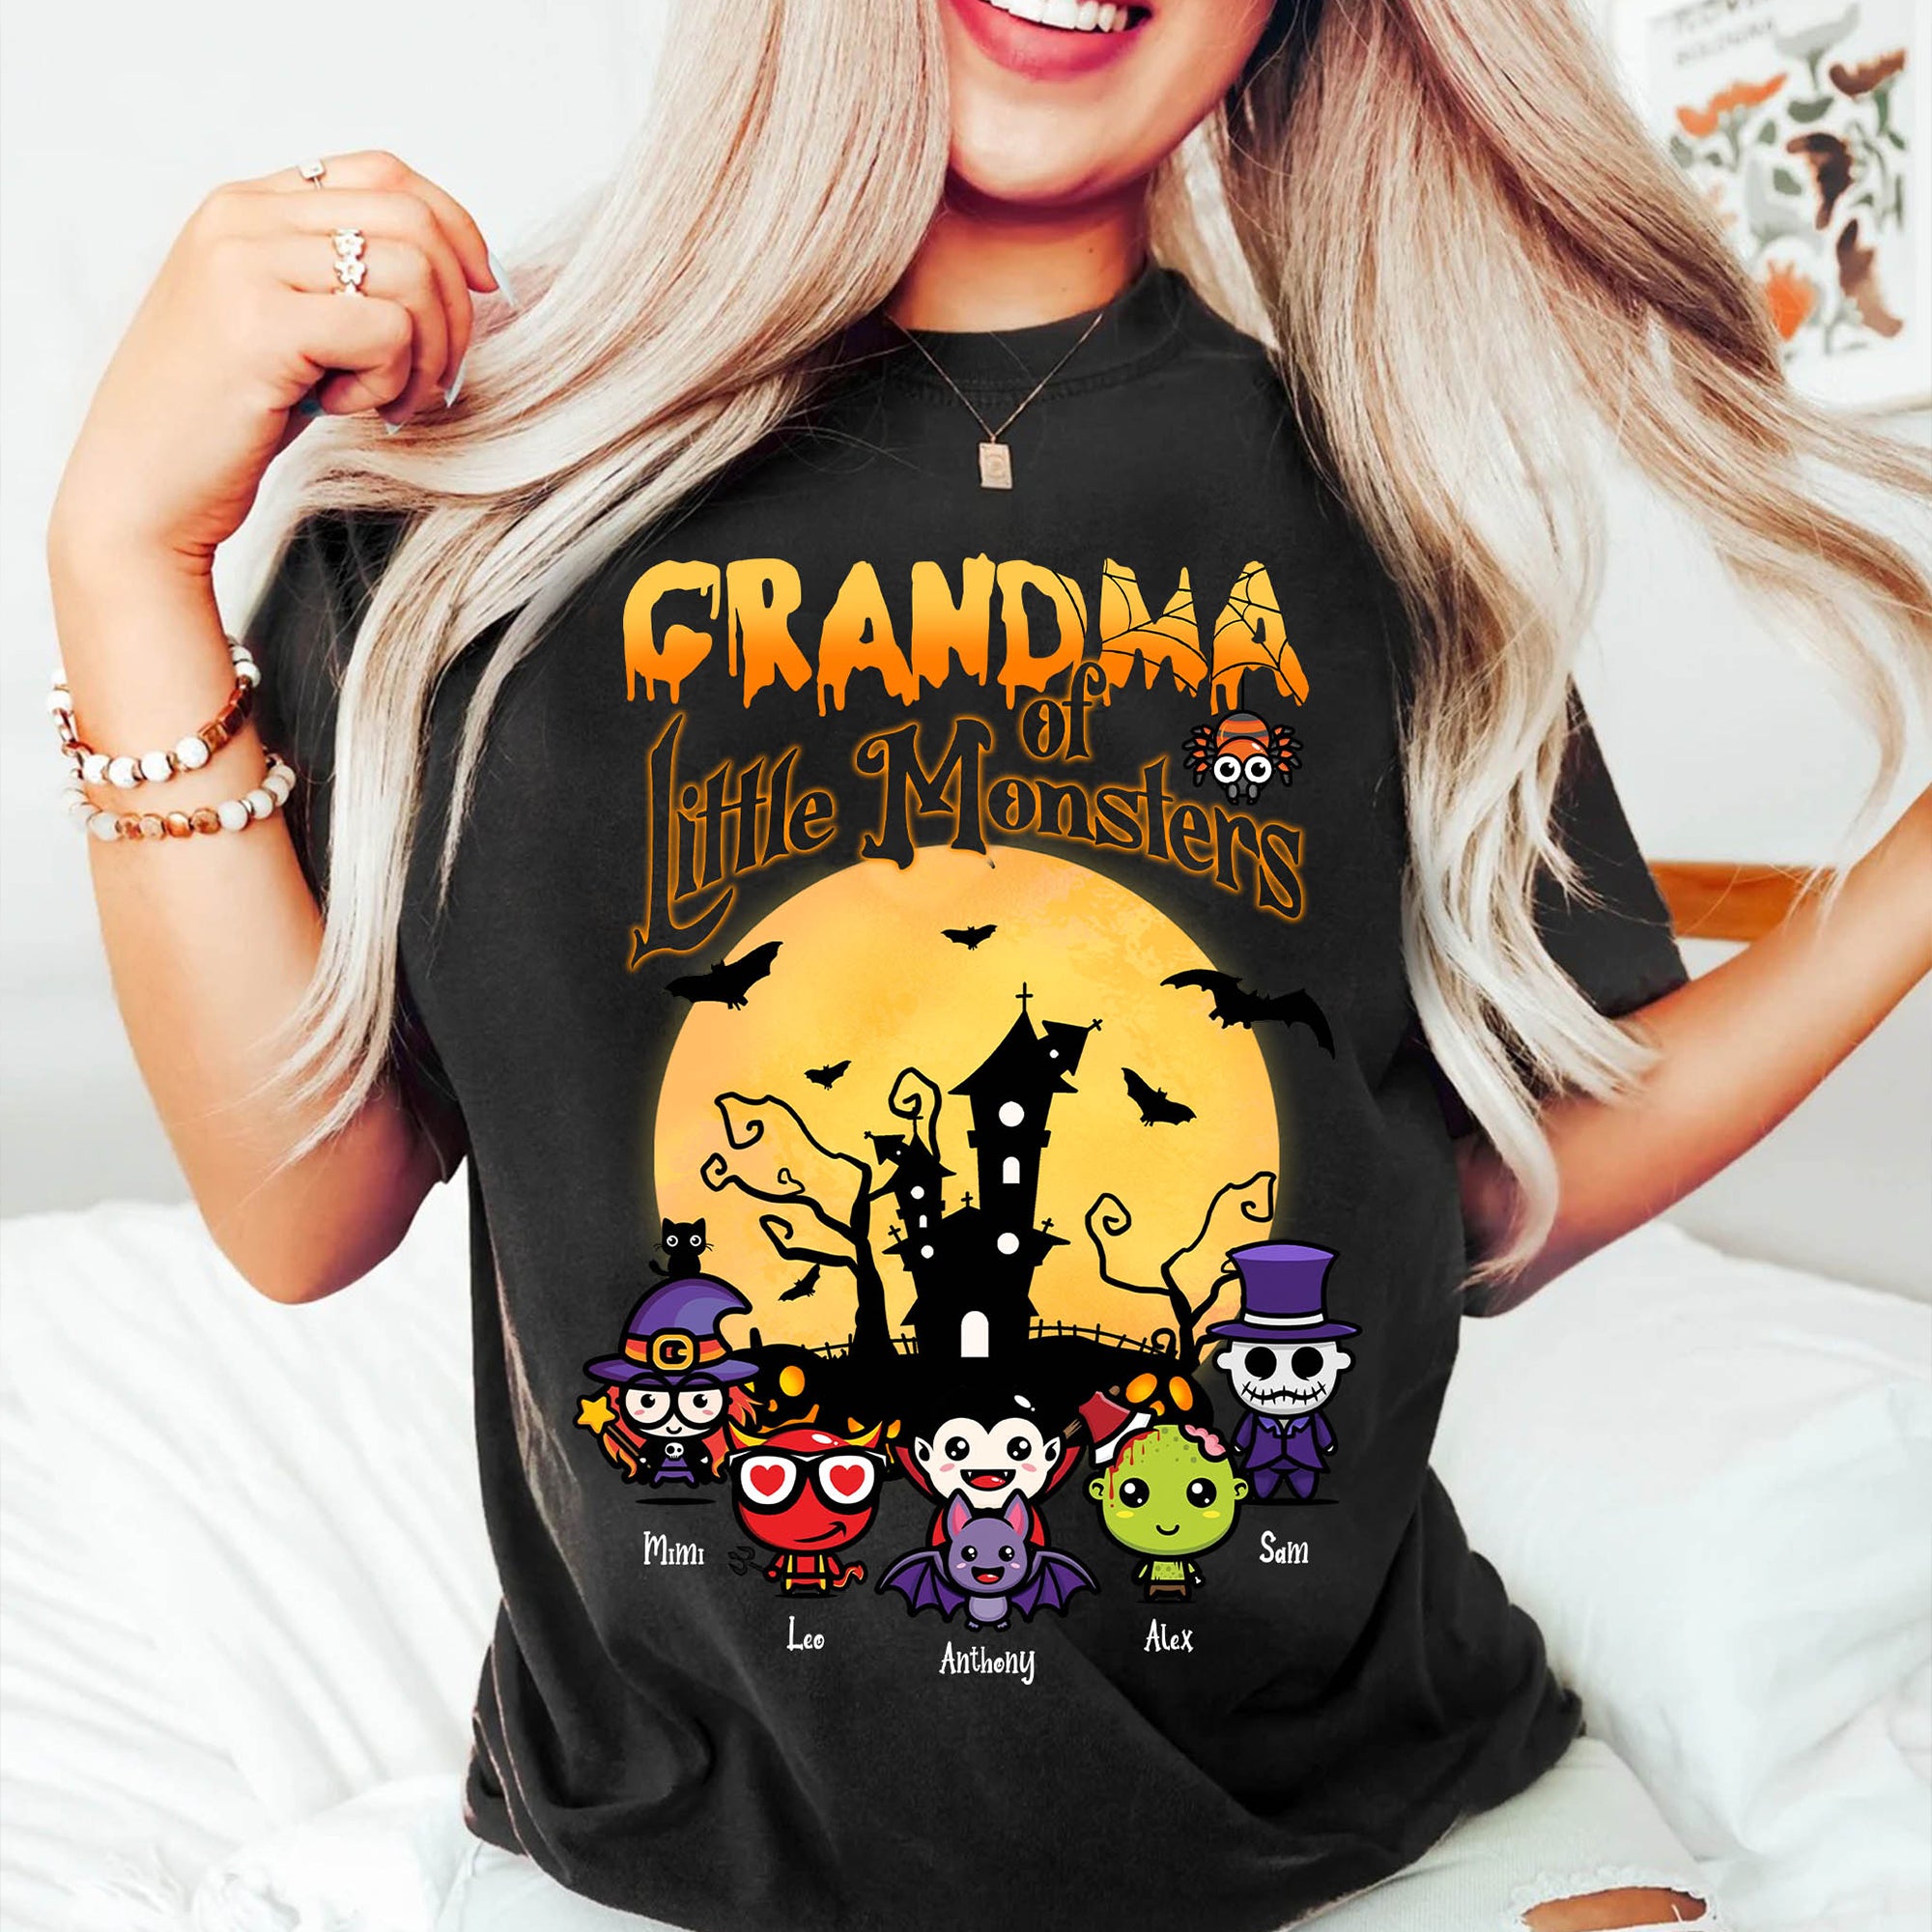 Grandma Of Little Monsters - Custom Appearance And Name - Personalized T-Shirt - Halloween Gift - Gift For Family